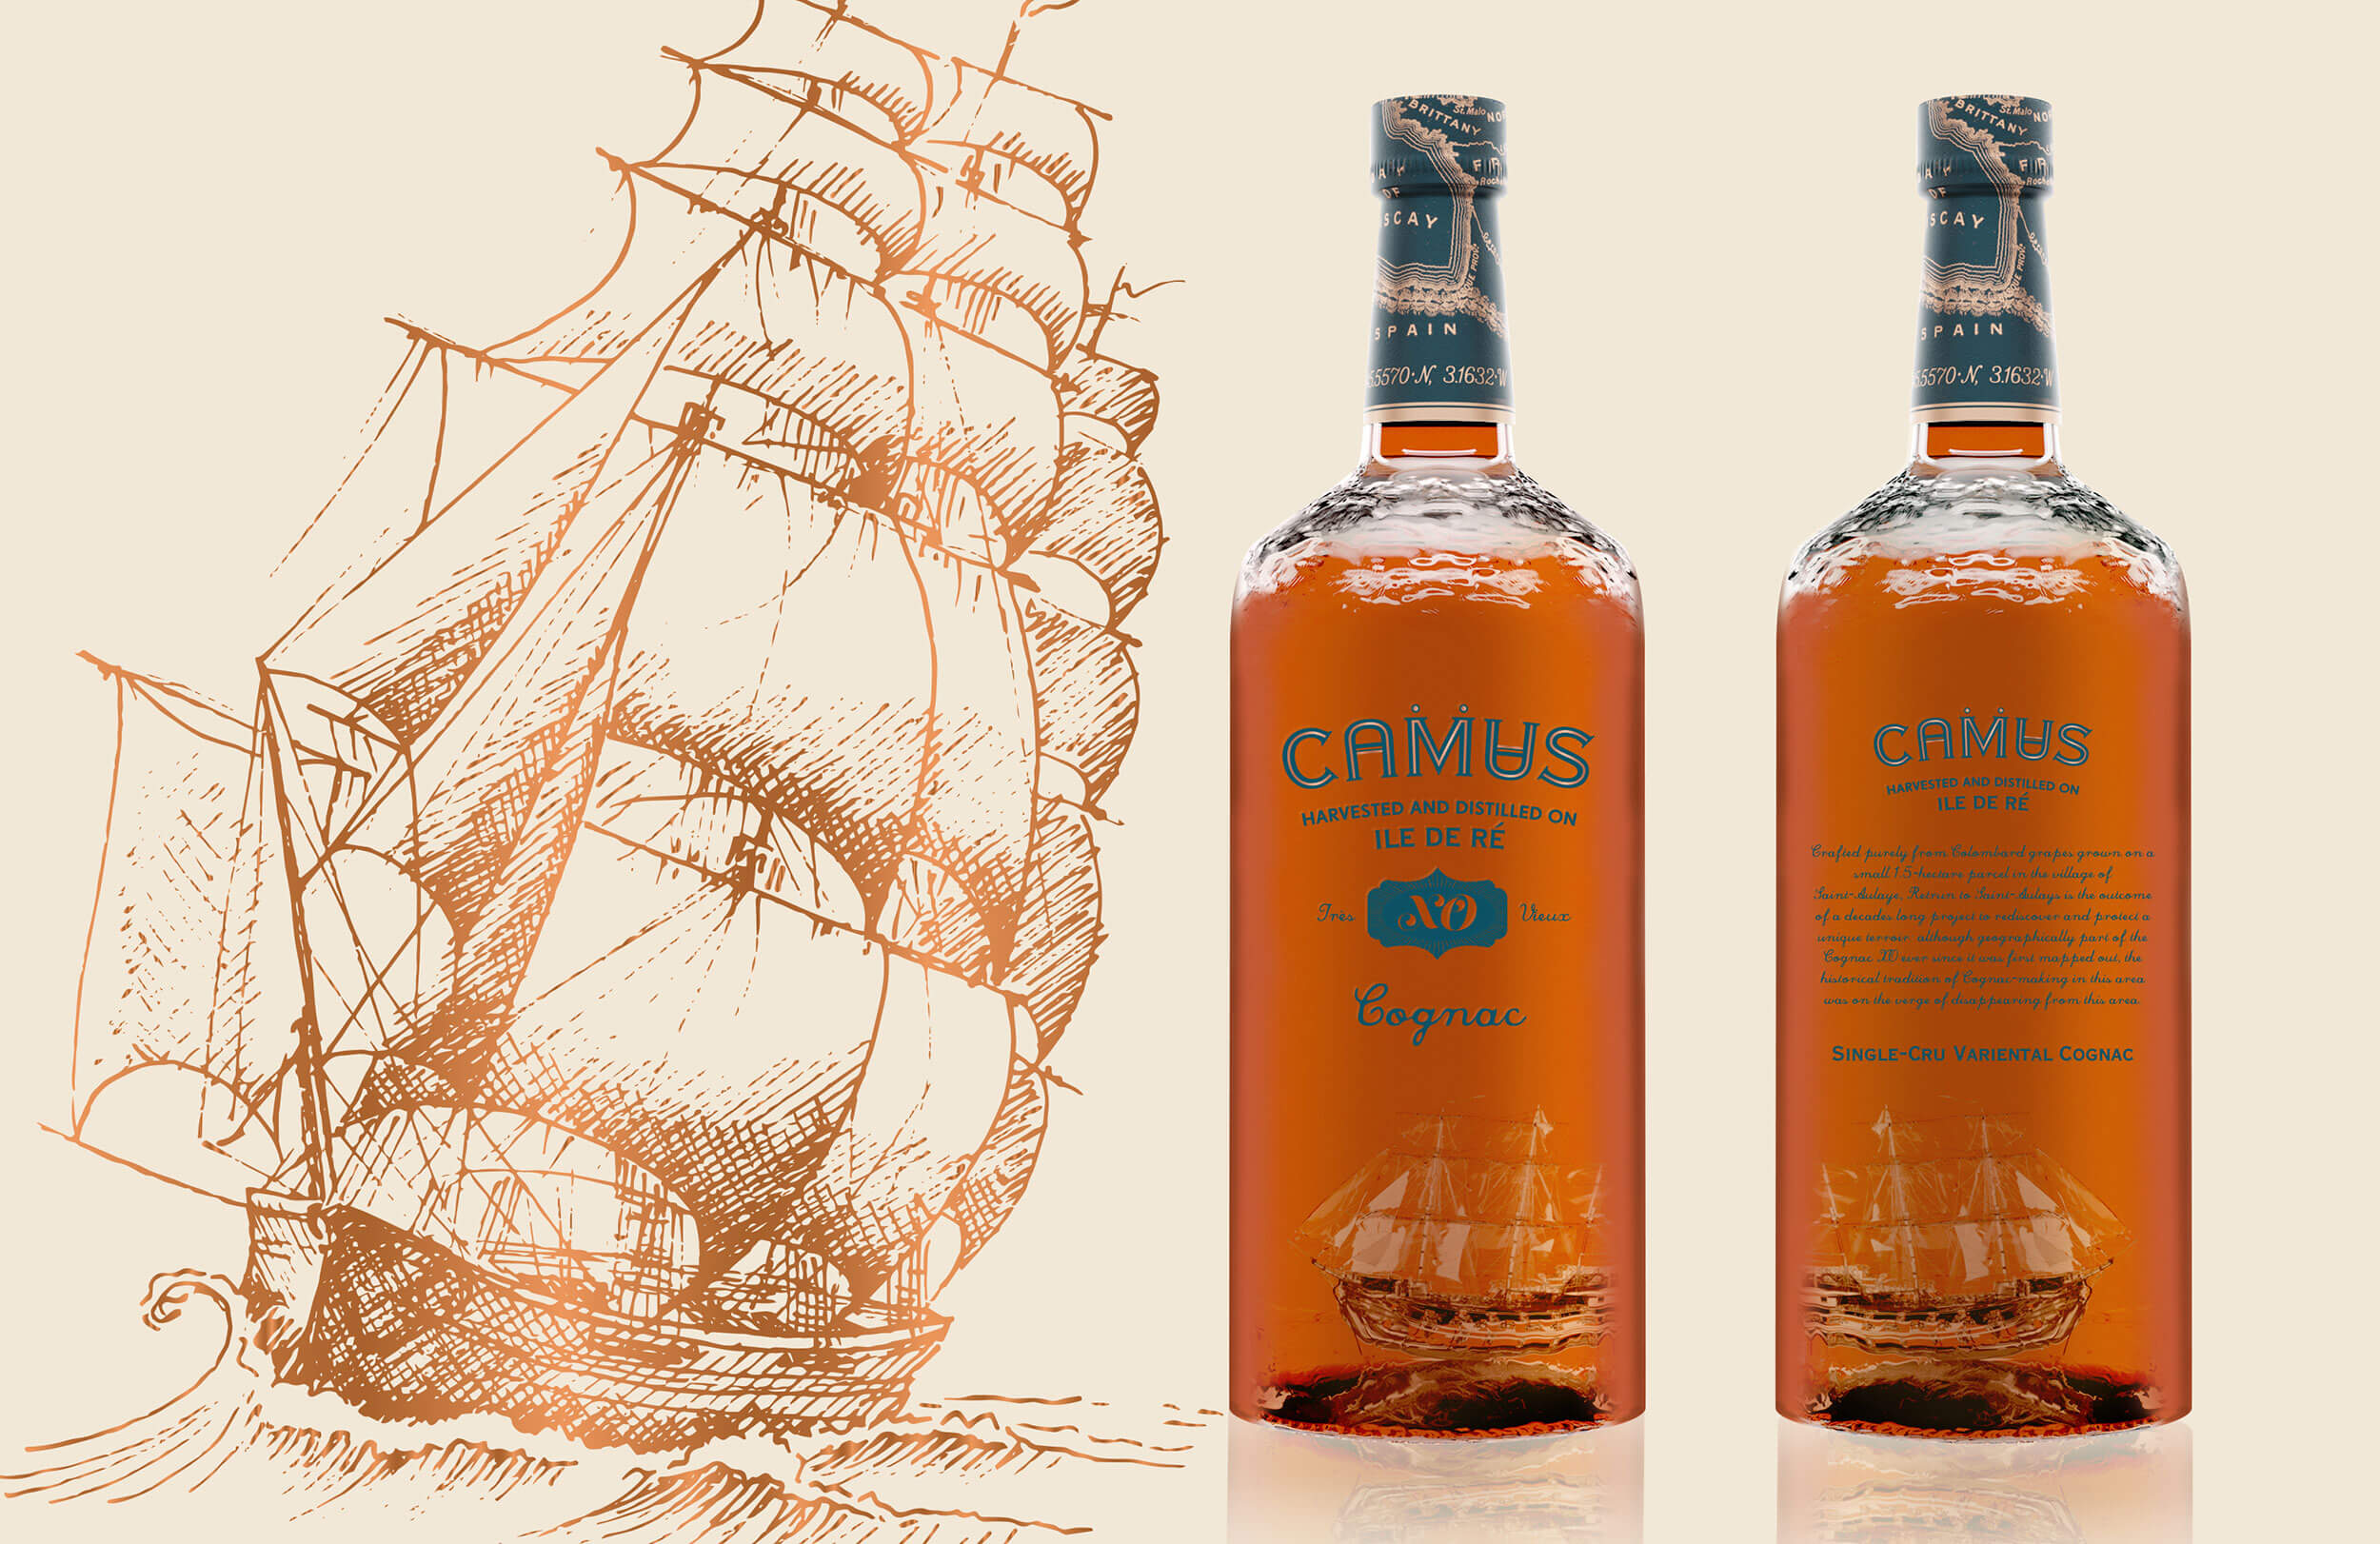 Camus bottle package redesign - front and back